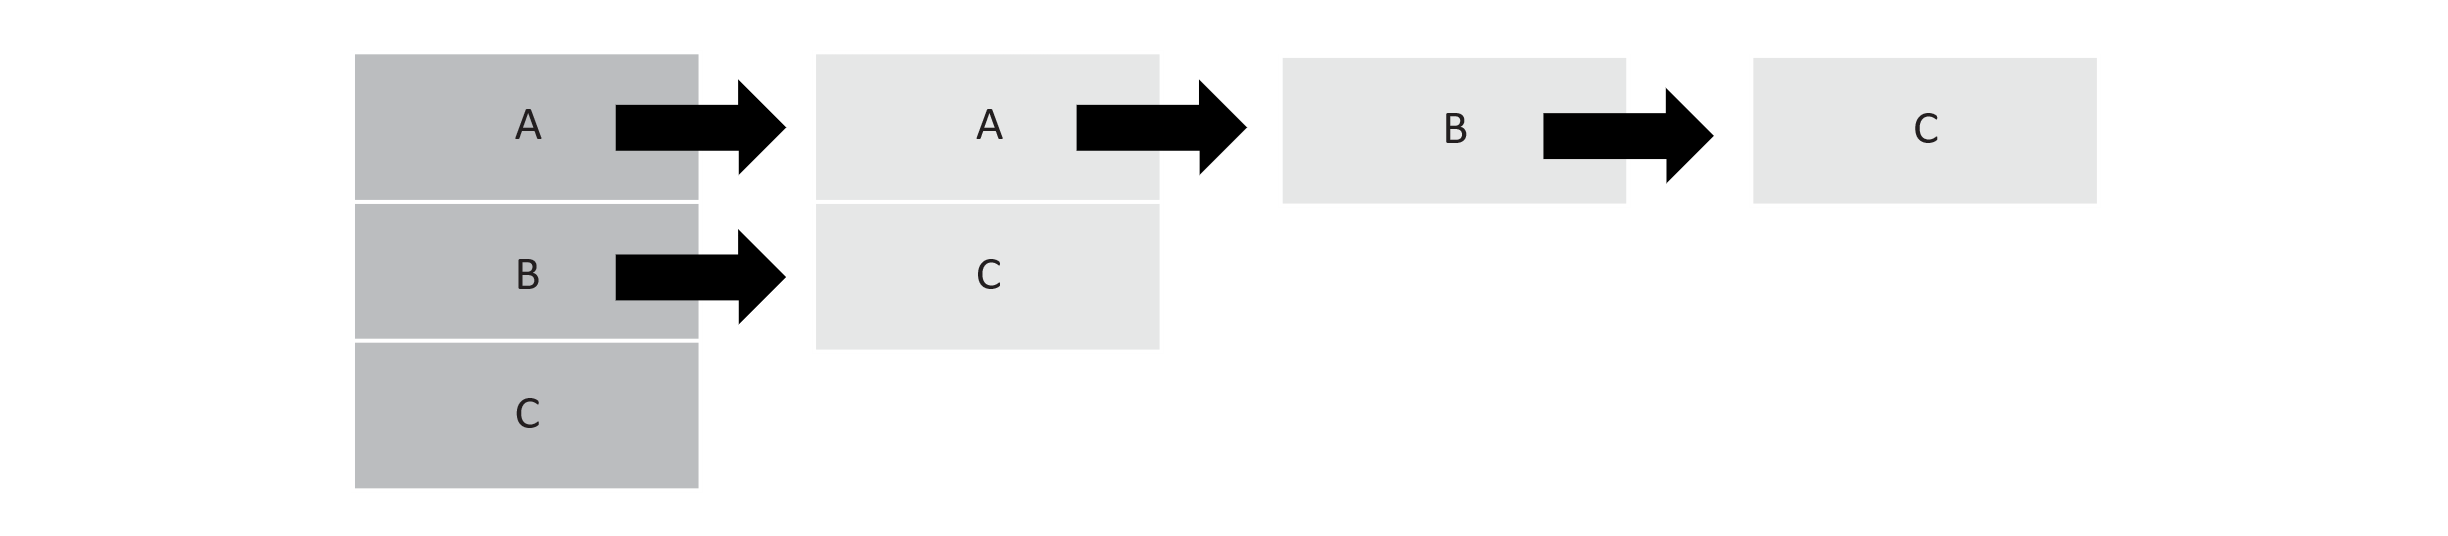 A series of boxes on the left side containing the identifiers of nodes. Each box points to a list of adjacent nodes.